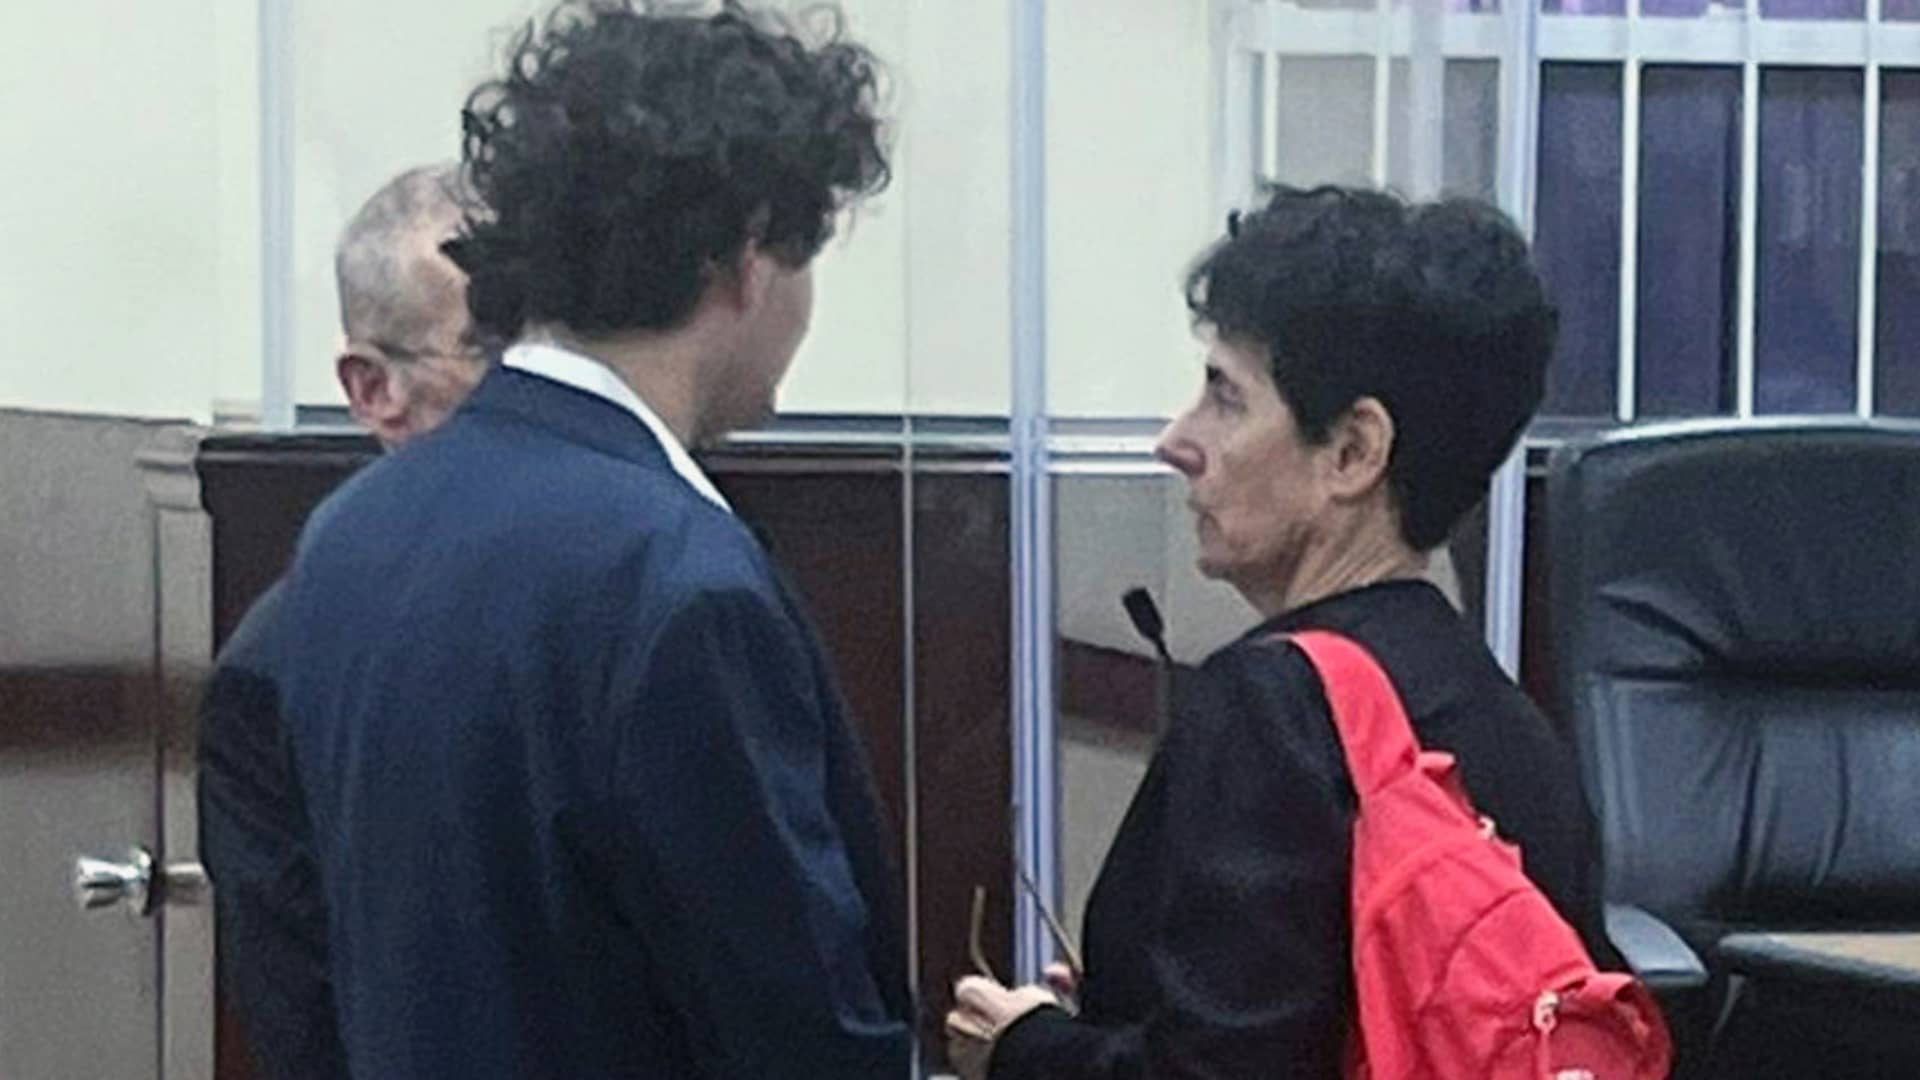 Sam Bankman-Fried, founder of FTX, left, and his mother Barbara Fried at the Magistrate's Court in Nassau, Bahamas, on Tuesday, Dec. 13, 2022. Bankman-Fried was denied bail by a judge, leaving the disgraced co-founder of crypto giant FTX behind bars. 